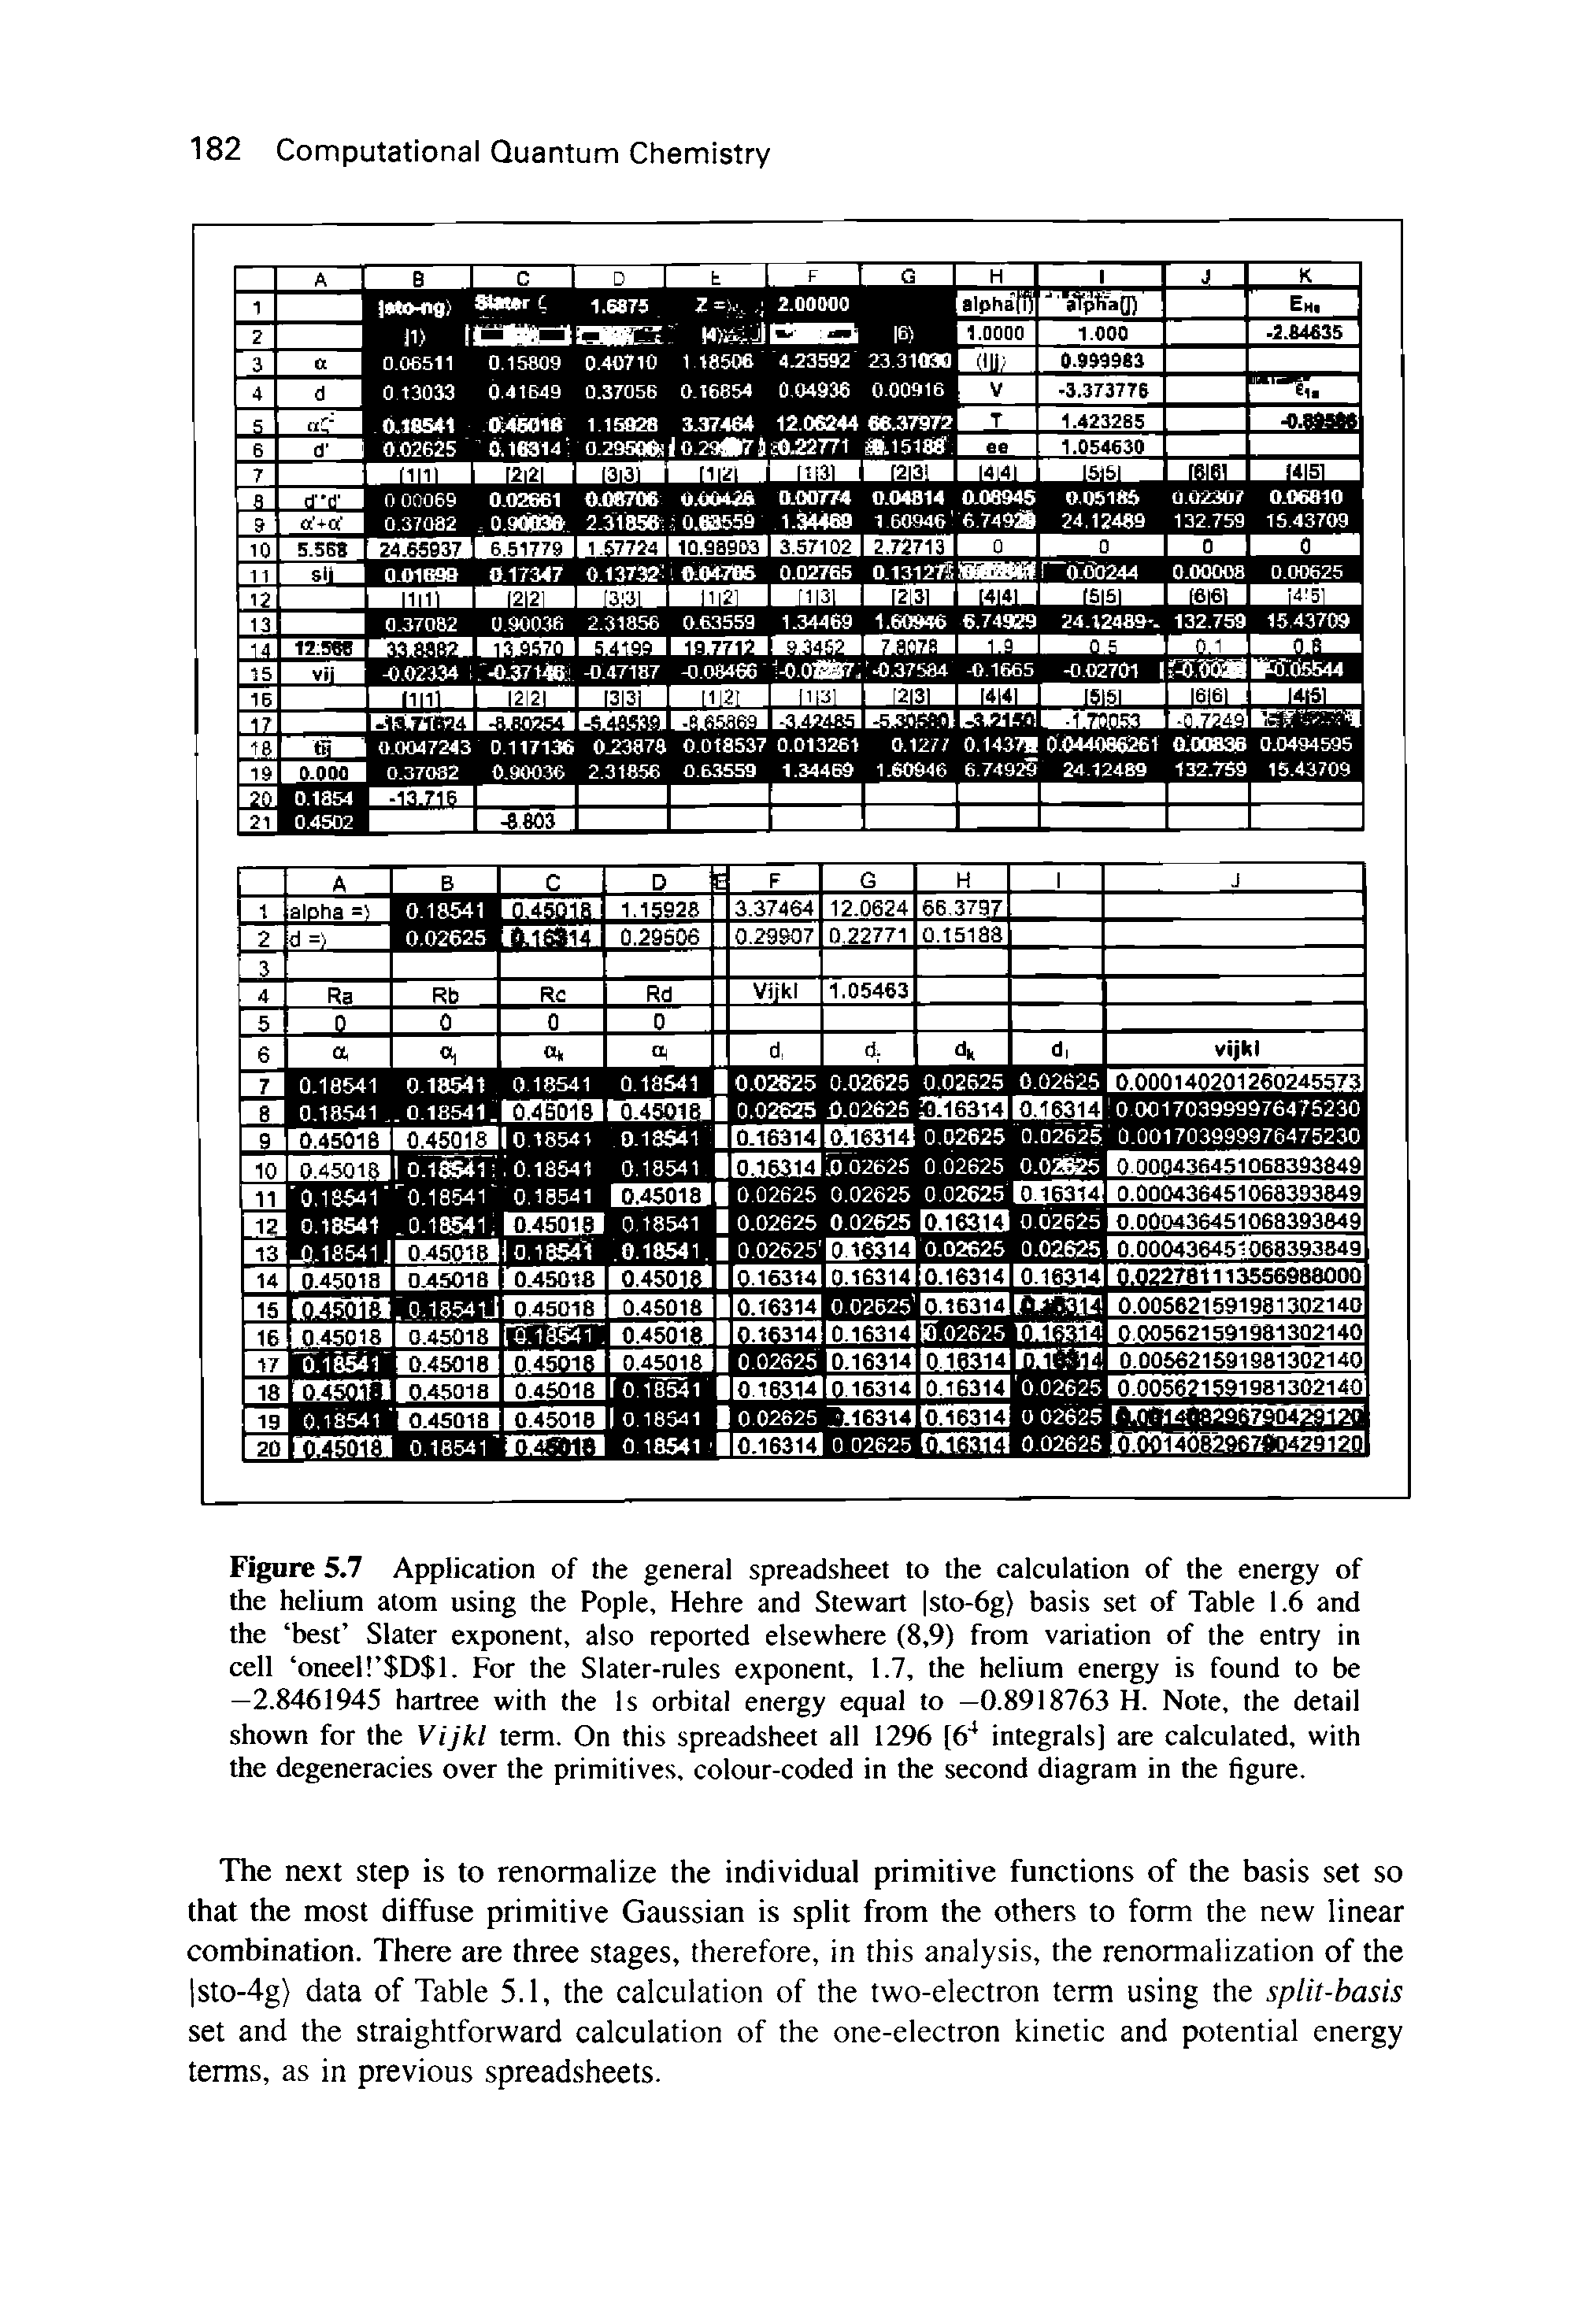 Figure 5.7 Application of the general spreadsheet to the calculation of the energy of the helium atom using the Pople, Hehre and Stewart sto-6g) basis set of Table 1.6 and the best Slater exponent, also reported elsewhere (8,9) from variation of the entry in cell oneel D l. For the Slater-rules exponent, 1.7, the helium energy is found to be —2.8461945 hartree with the Is orbital energy equal to —0.8918763 H. Note, the detail shown for the Vijkl term. On this spreadsheet all 1296 [6 integrals] are calculated, with the degeneracies over the primitives, colour-coded in the second diagram in the figure.